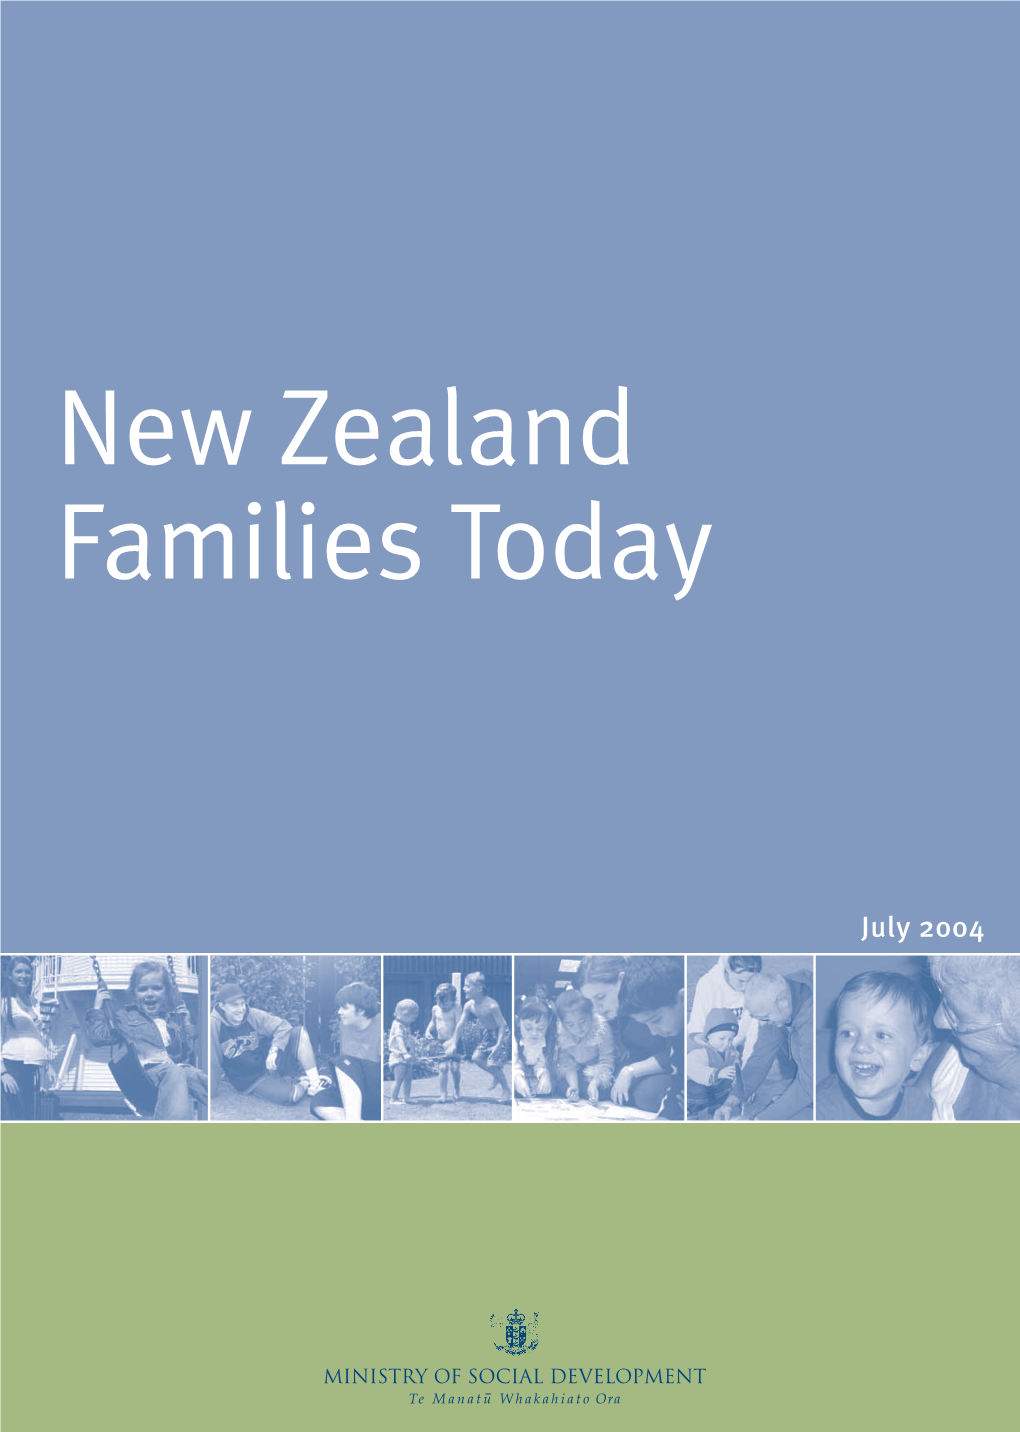 NZ Families Today